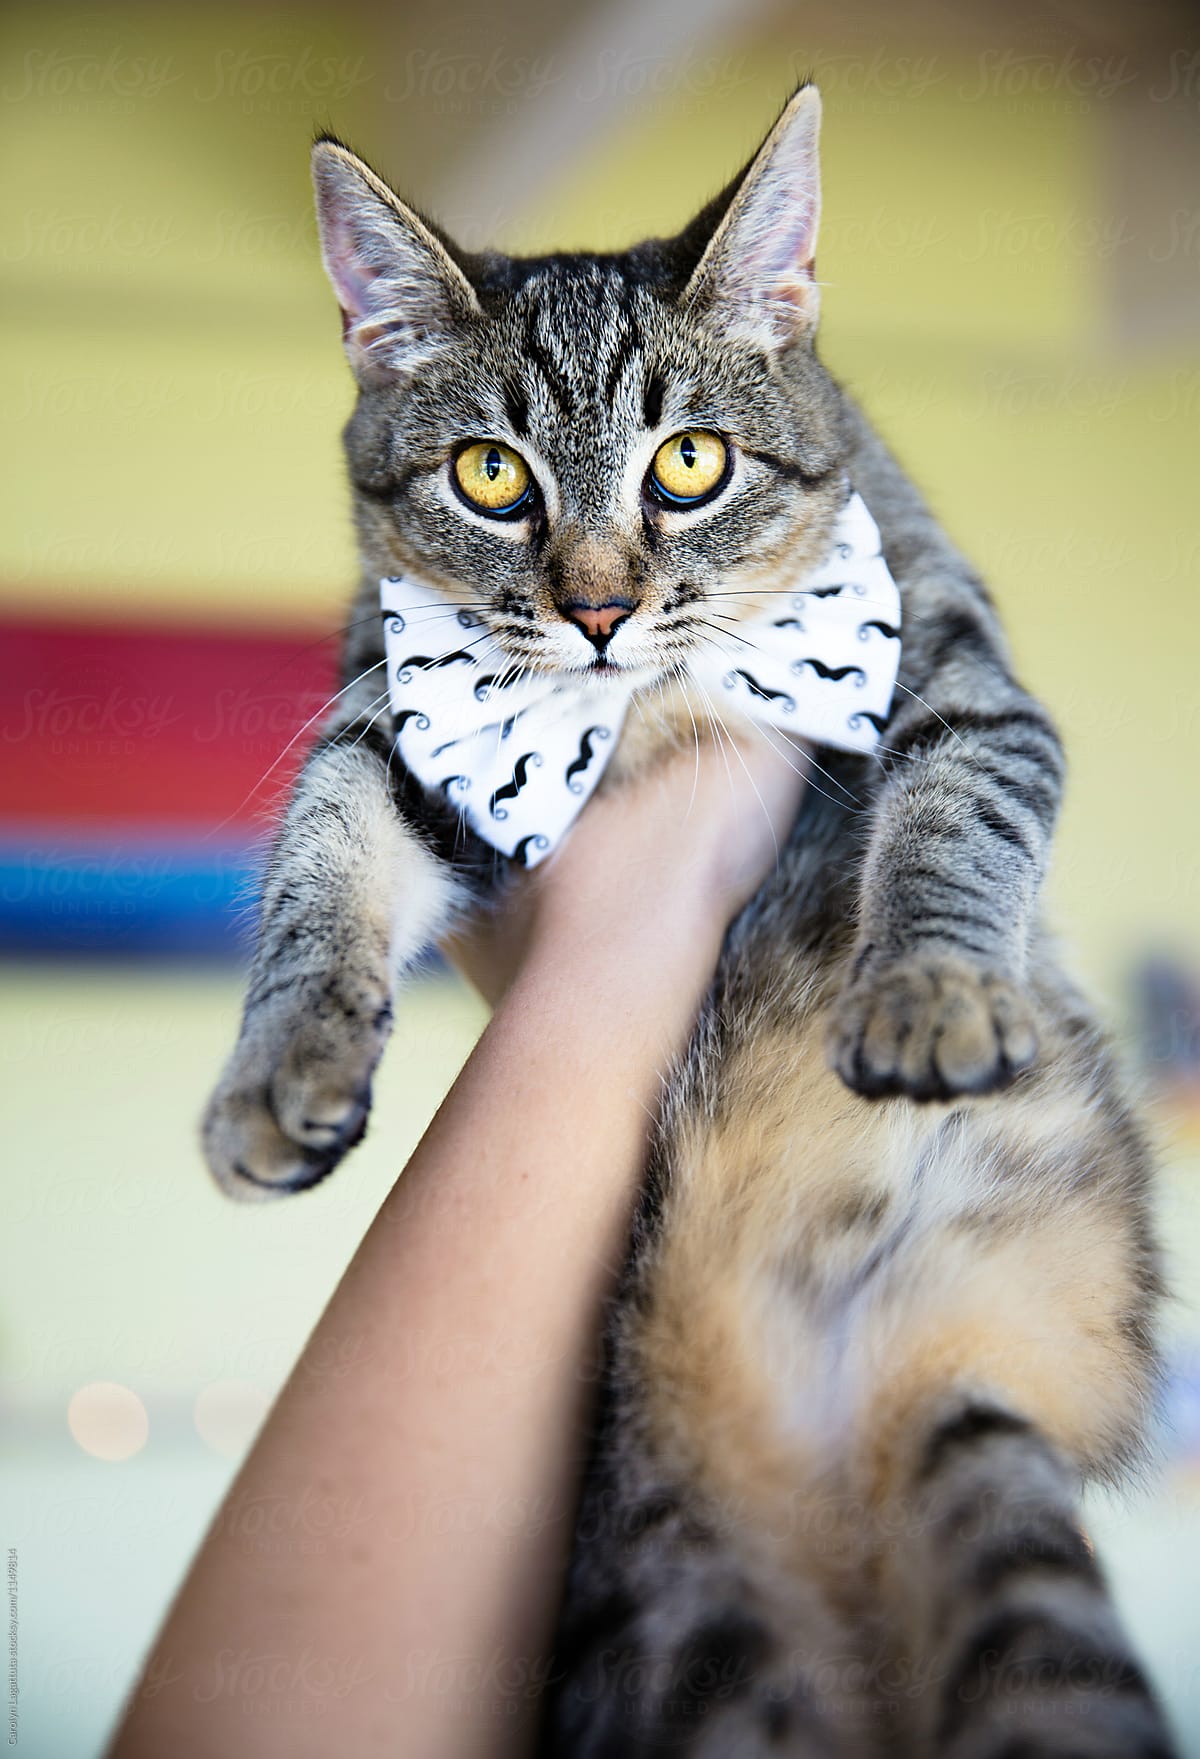 Tabby cat in a bow tie - not amused